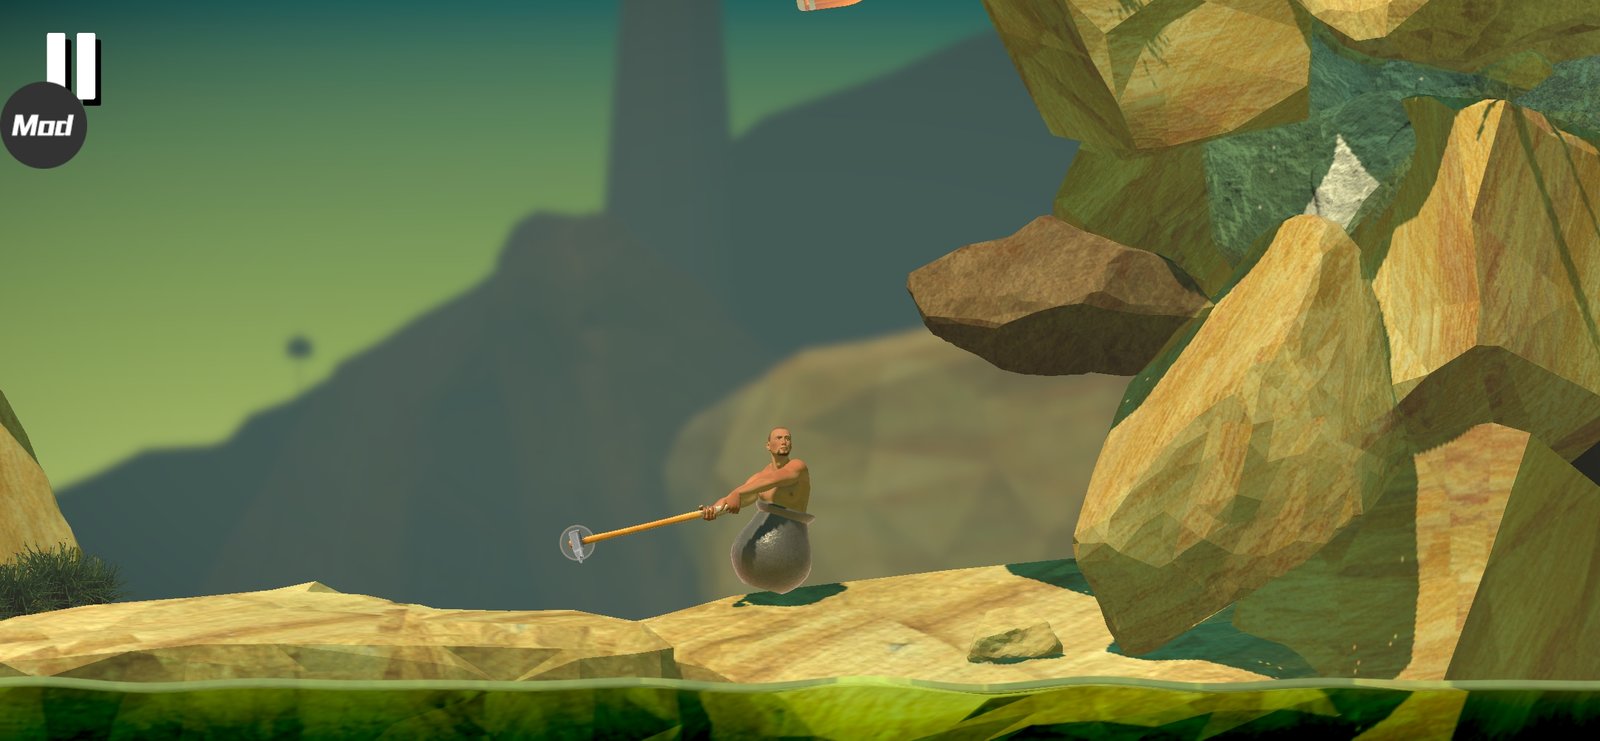 Getting Over It with Bennett Foddy Мод apk скачать - Getting Over It with  Bennett Foddy Мод Apk 1.9.8 [разблокирована][Полный] бесплатно для Android.